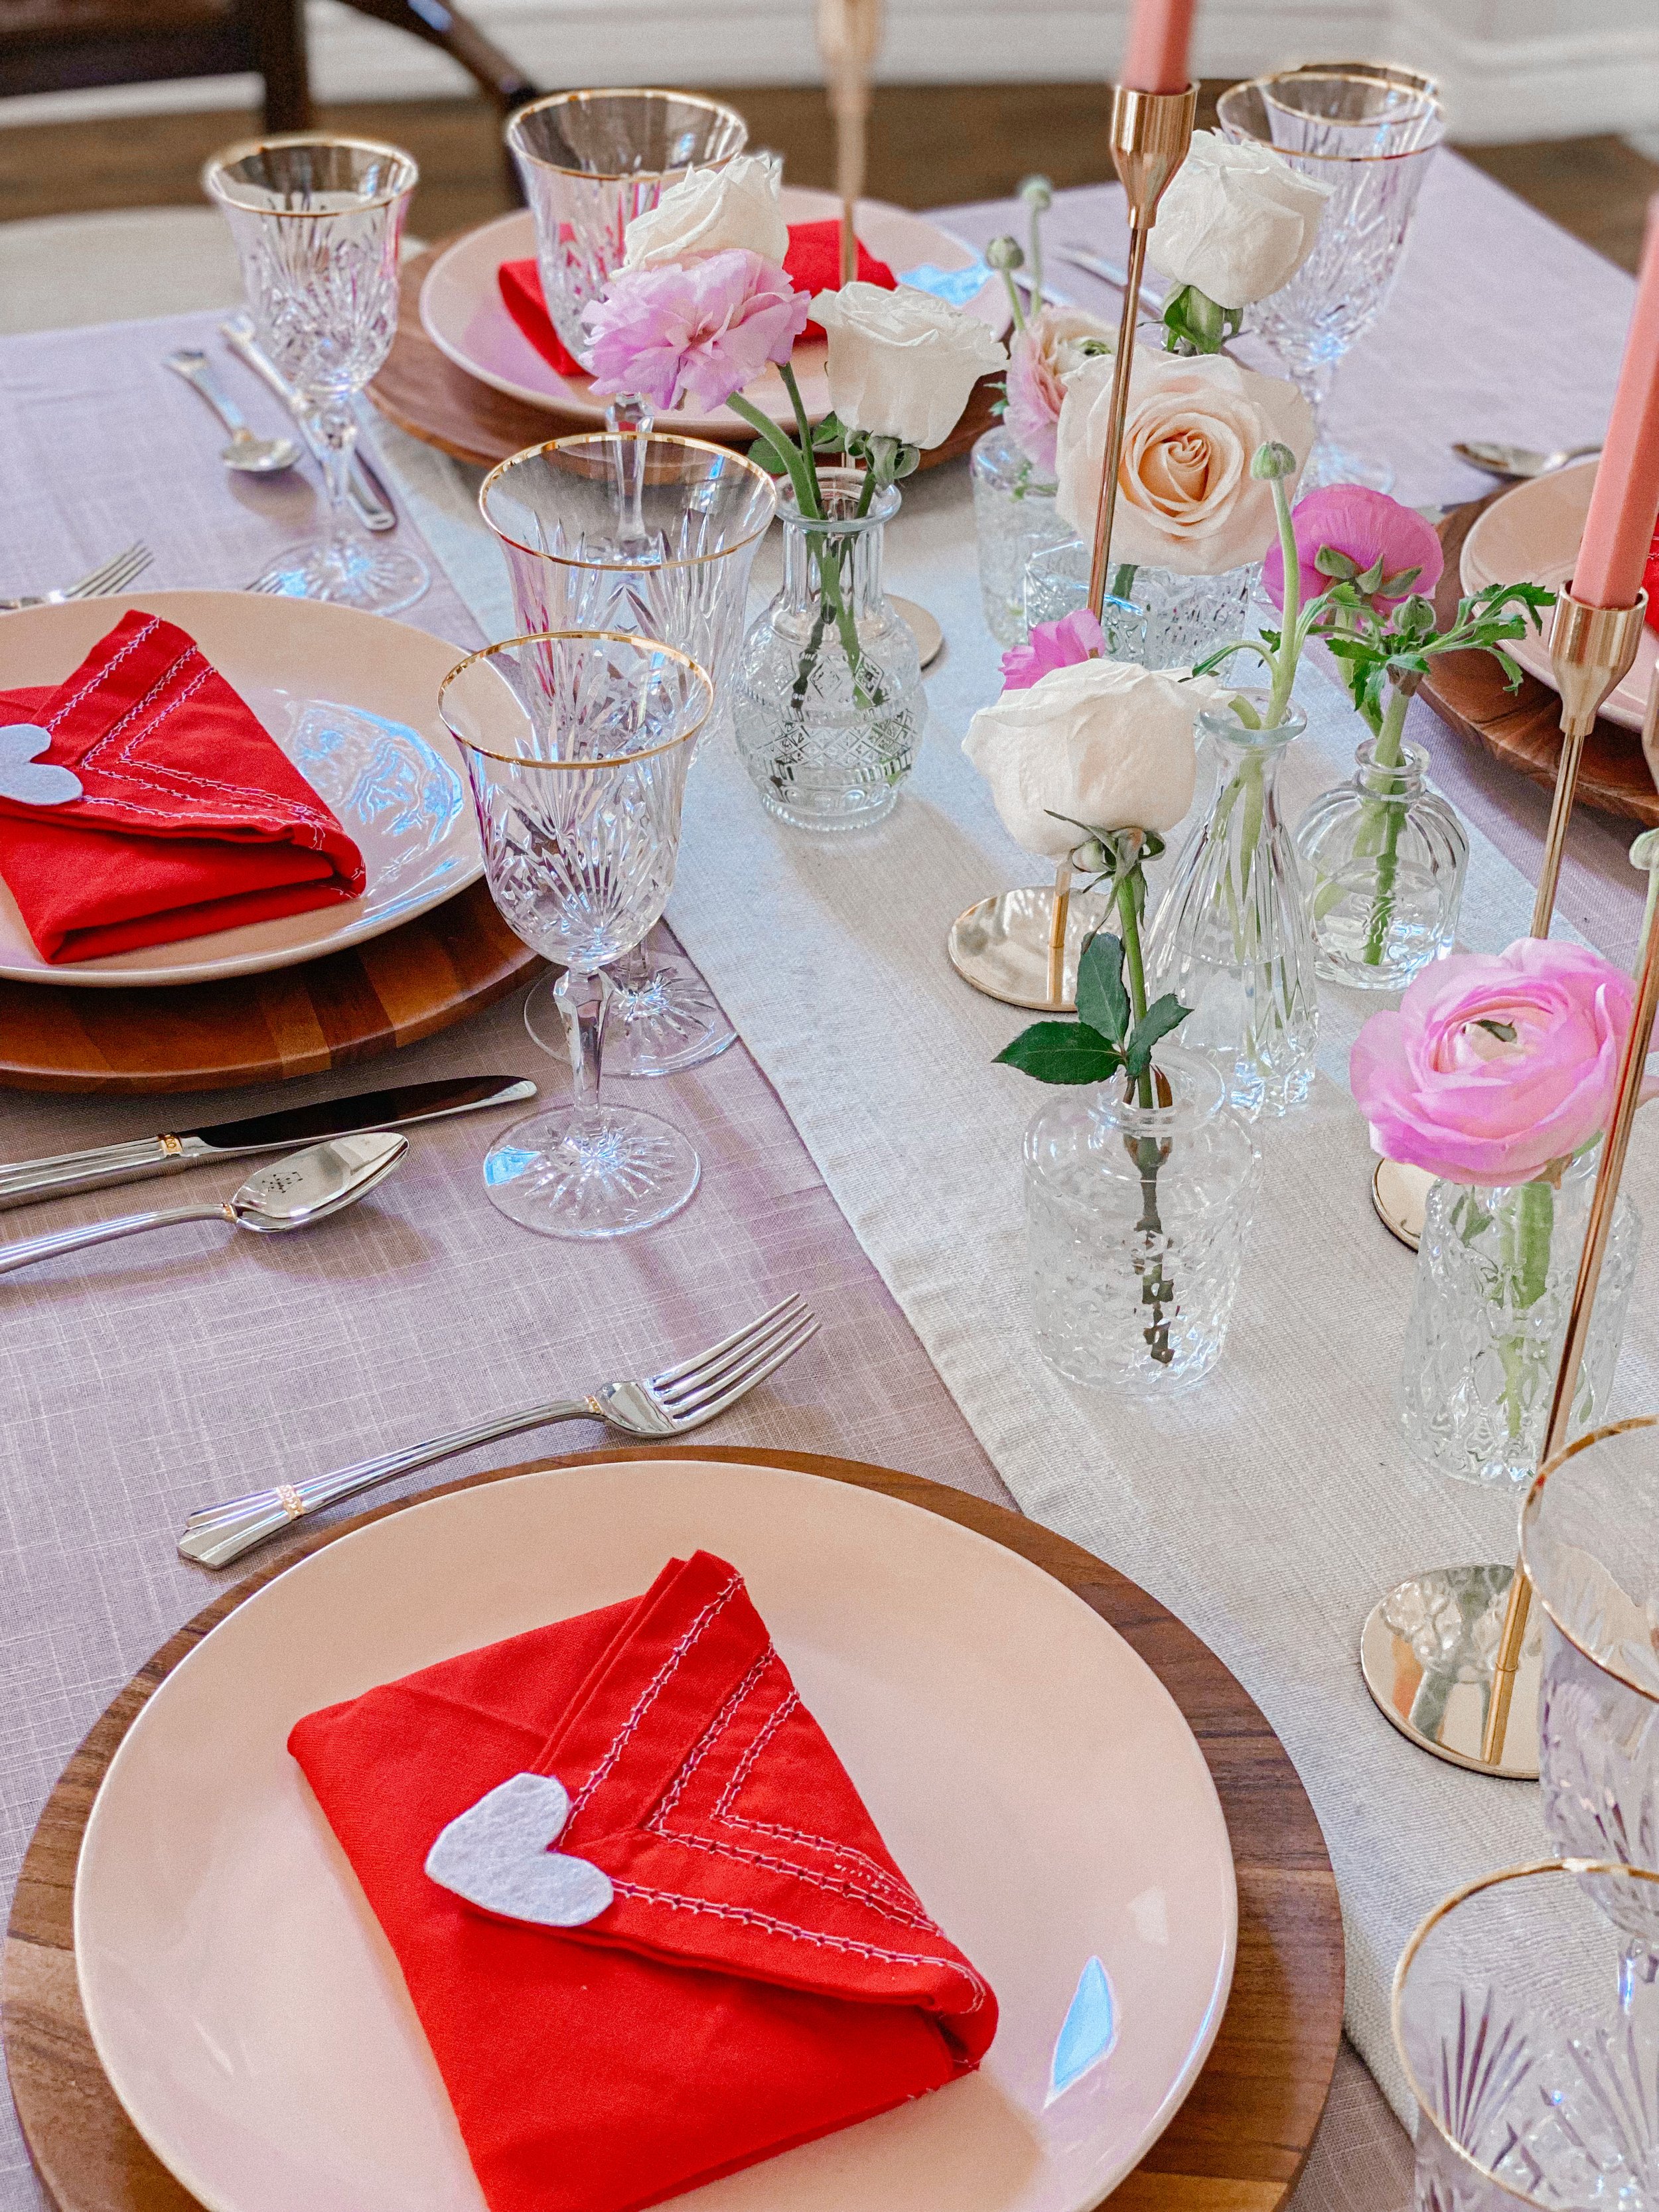 Valentine's Day Table Decor Inspiration — From Scratch with Maria Provenzano